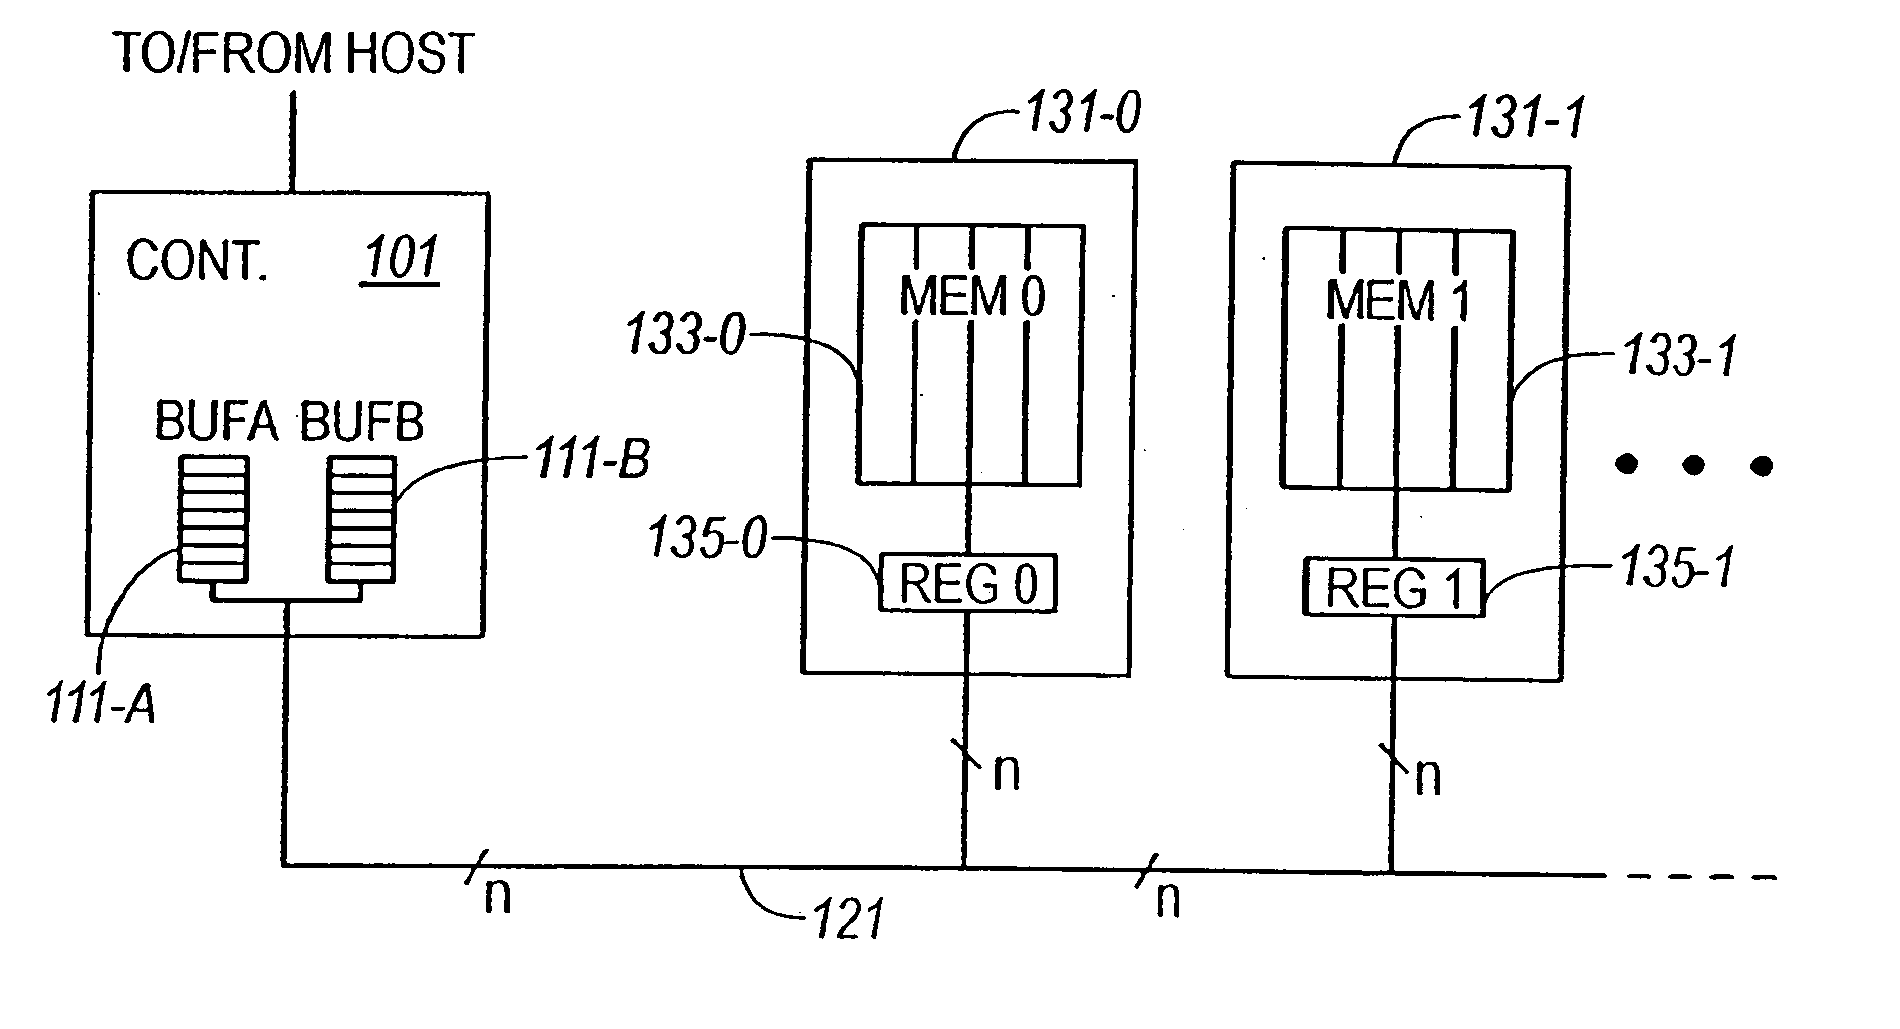 Pipelined parallel programming operation in a non-volatile memory system